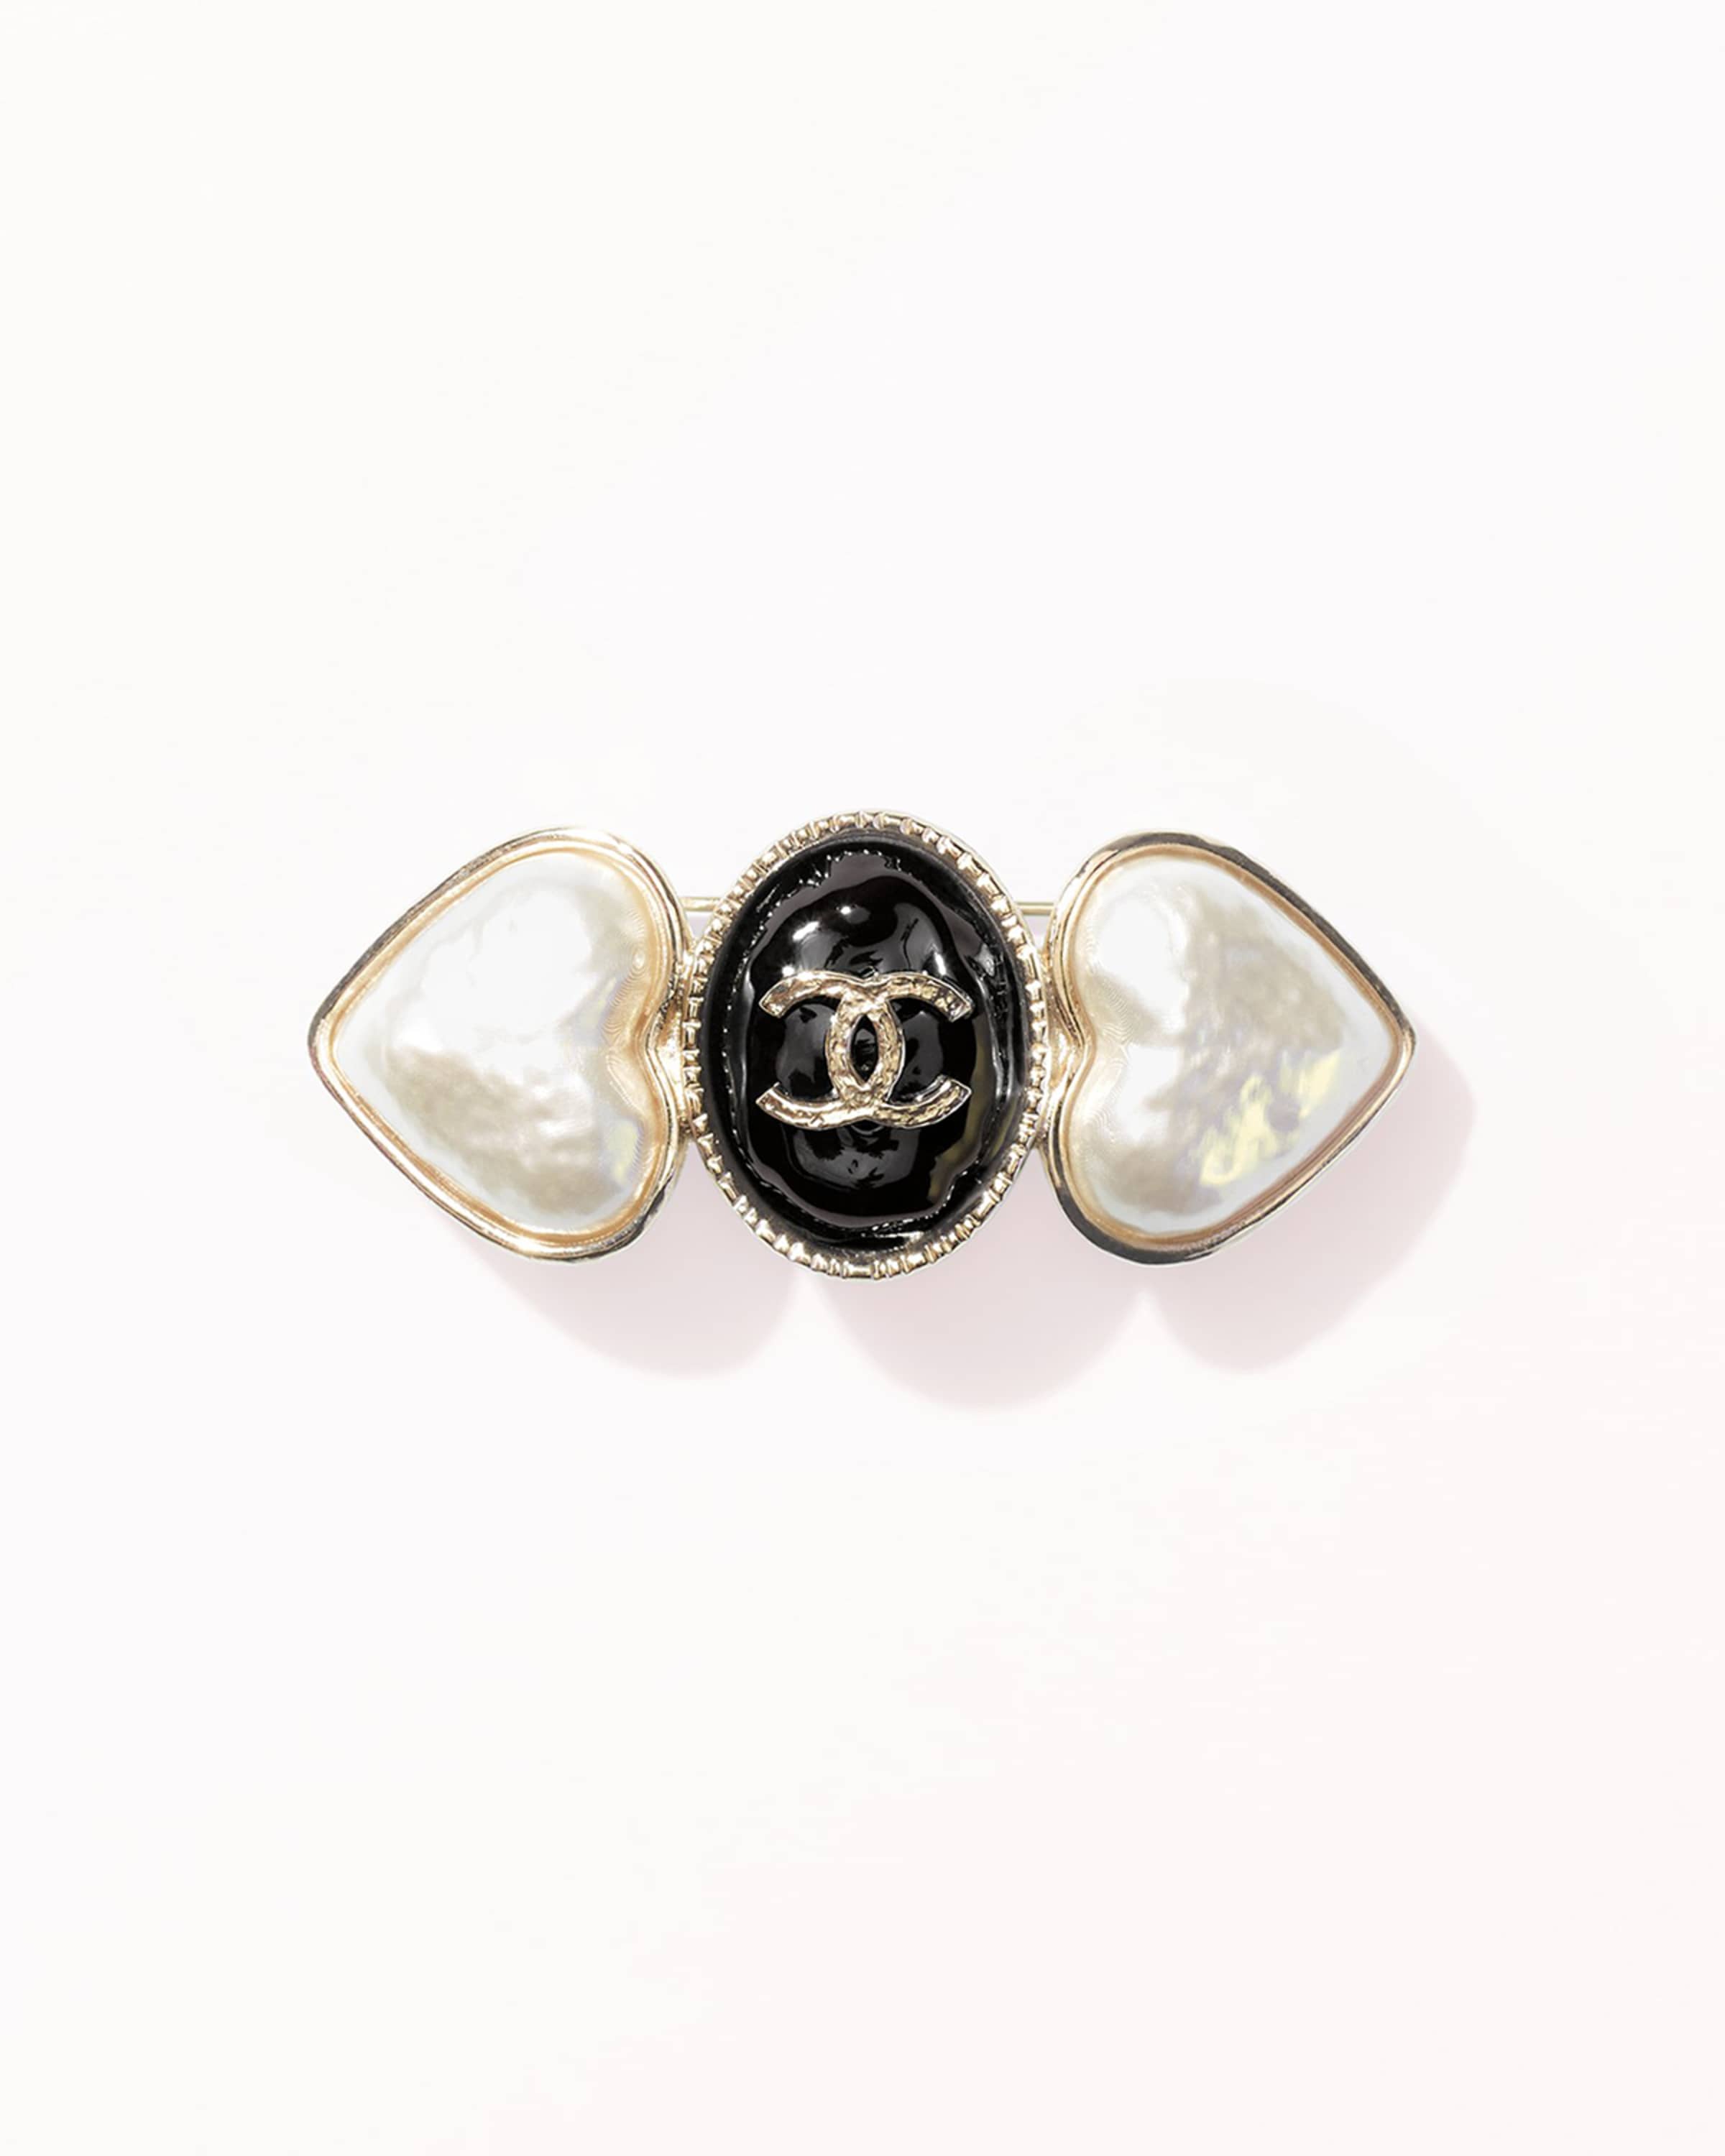 Chanel Brooch Collection | lupon.gov.ph